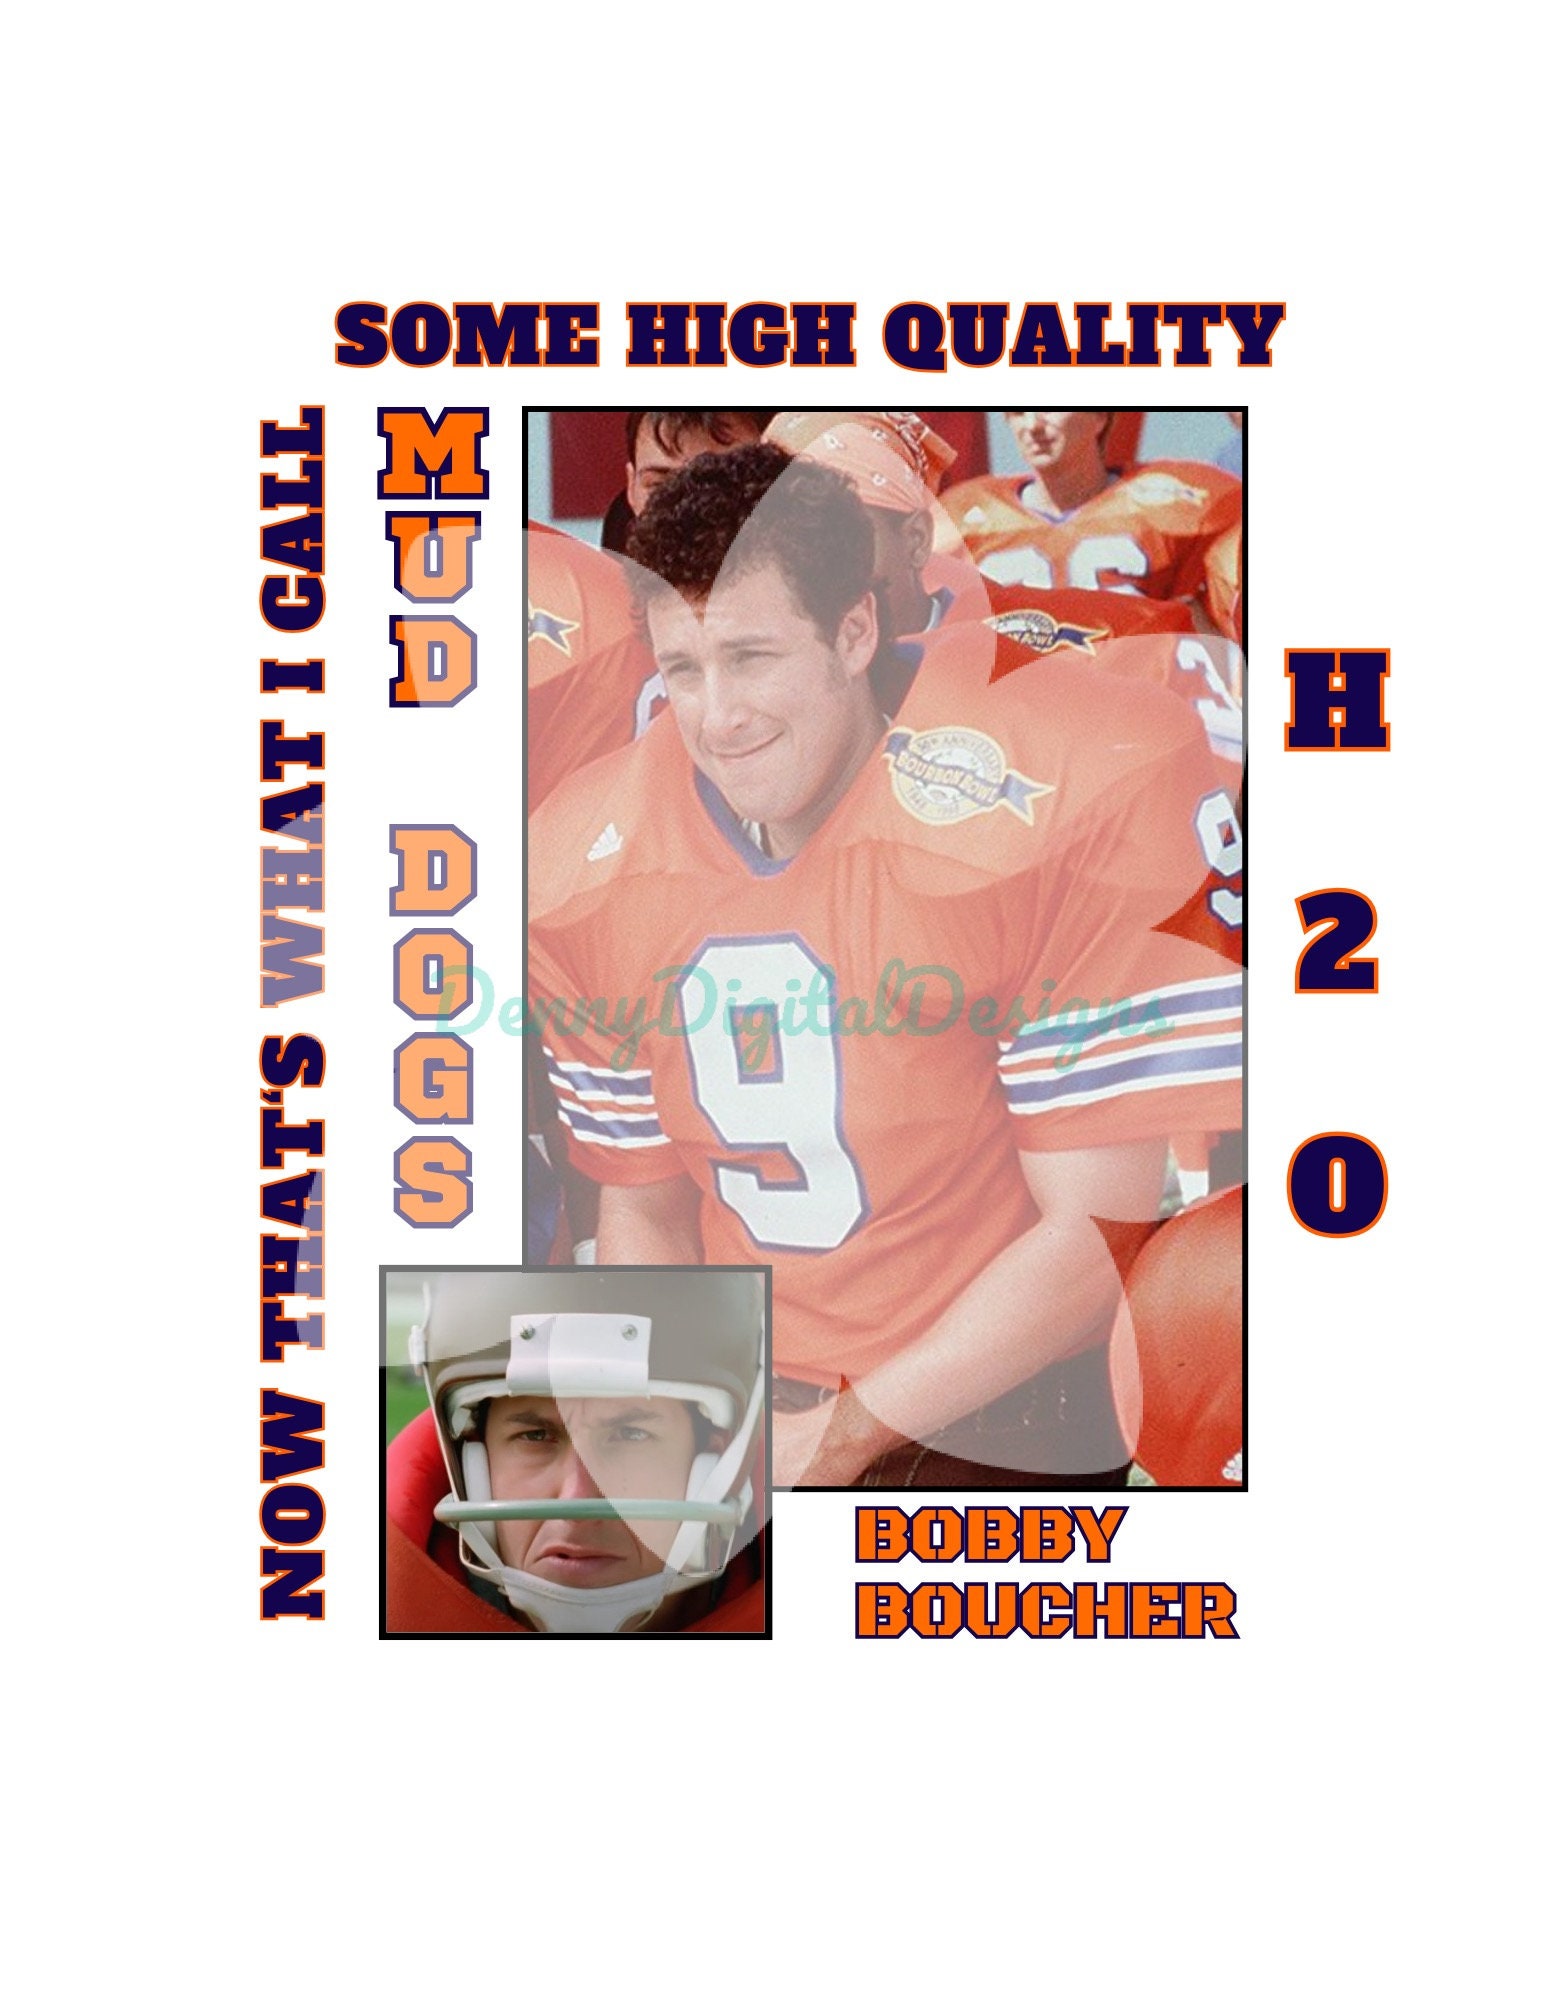  Men 9 Bobby Boucher Football Jersey The Waterboy Mud Dawgs  Movie Jersey Adam Sandler(Black,XX-Large) : Clothing, Shoes & Jewelry